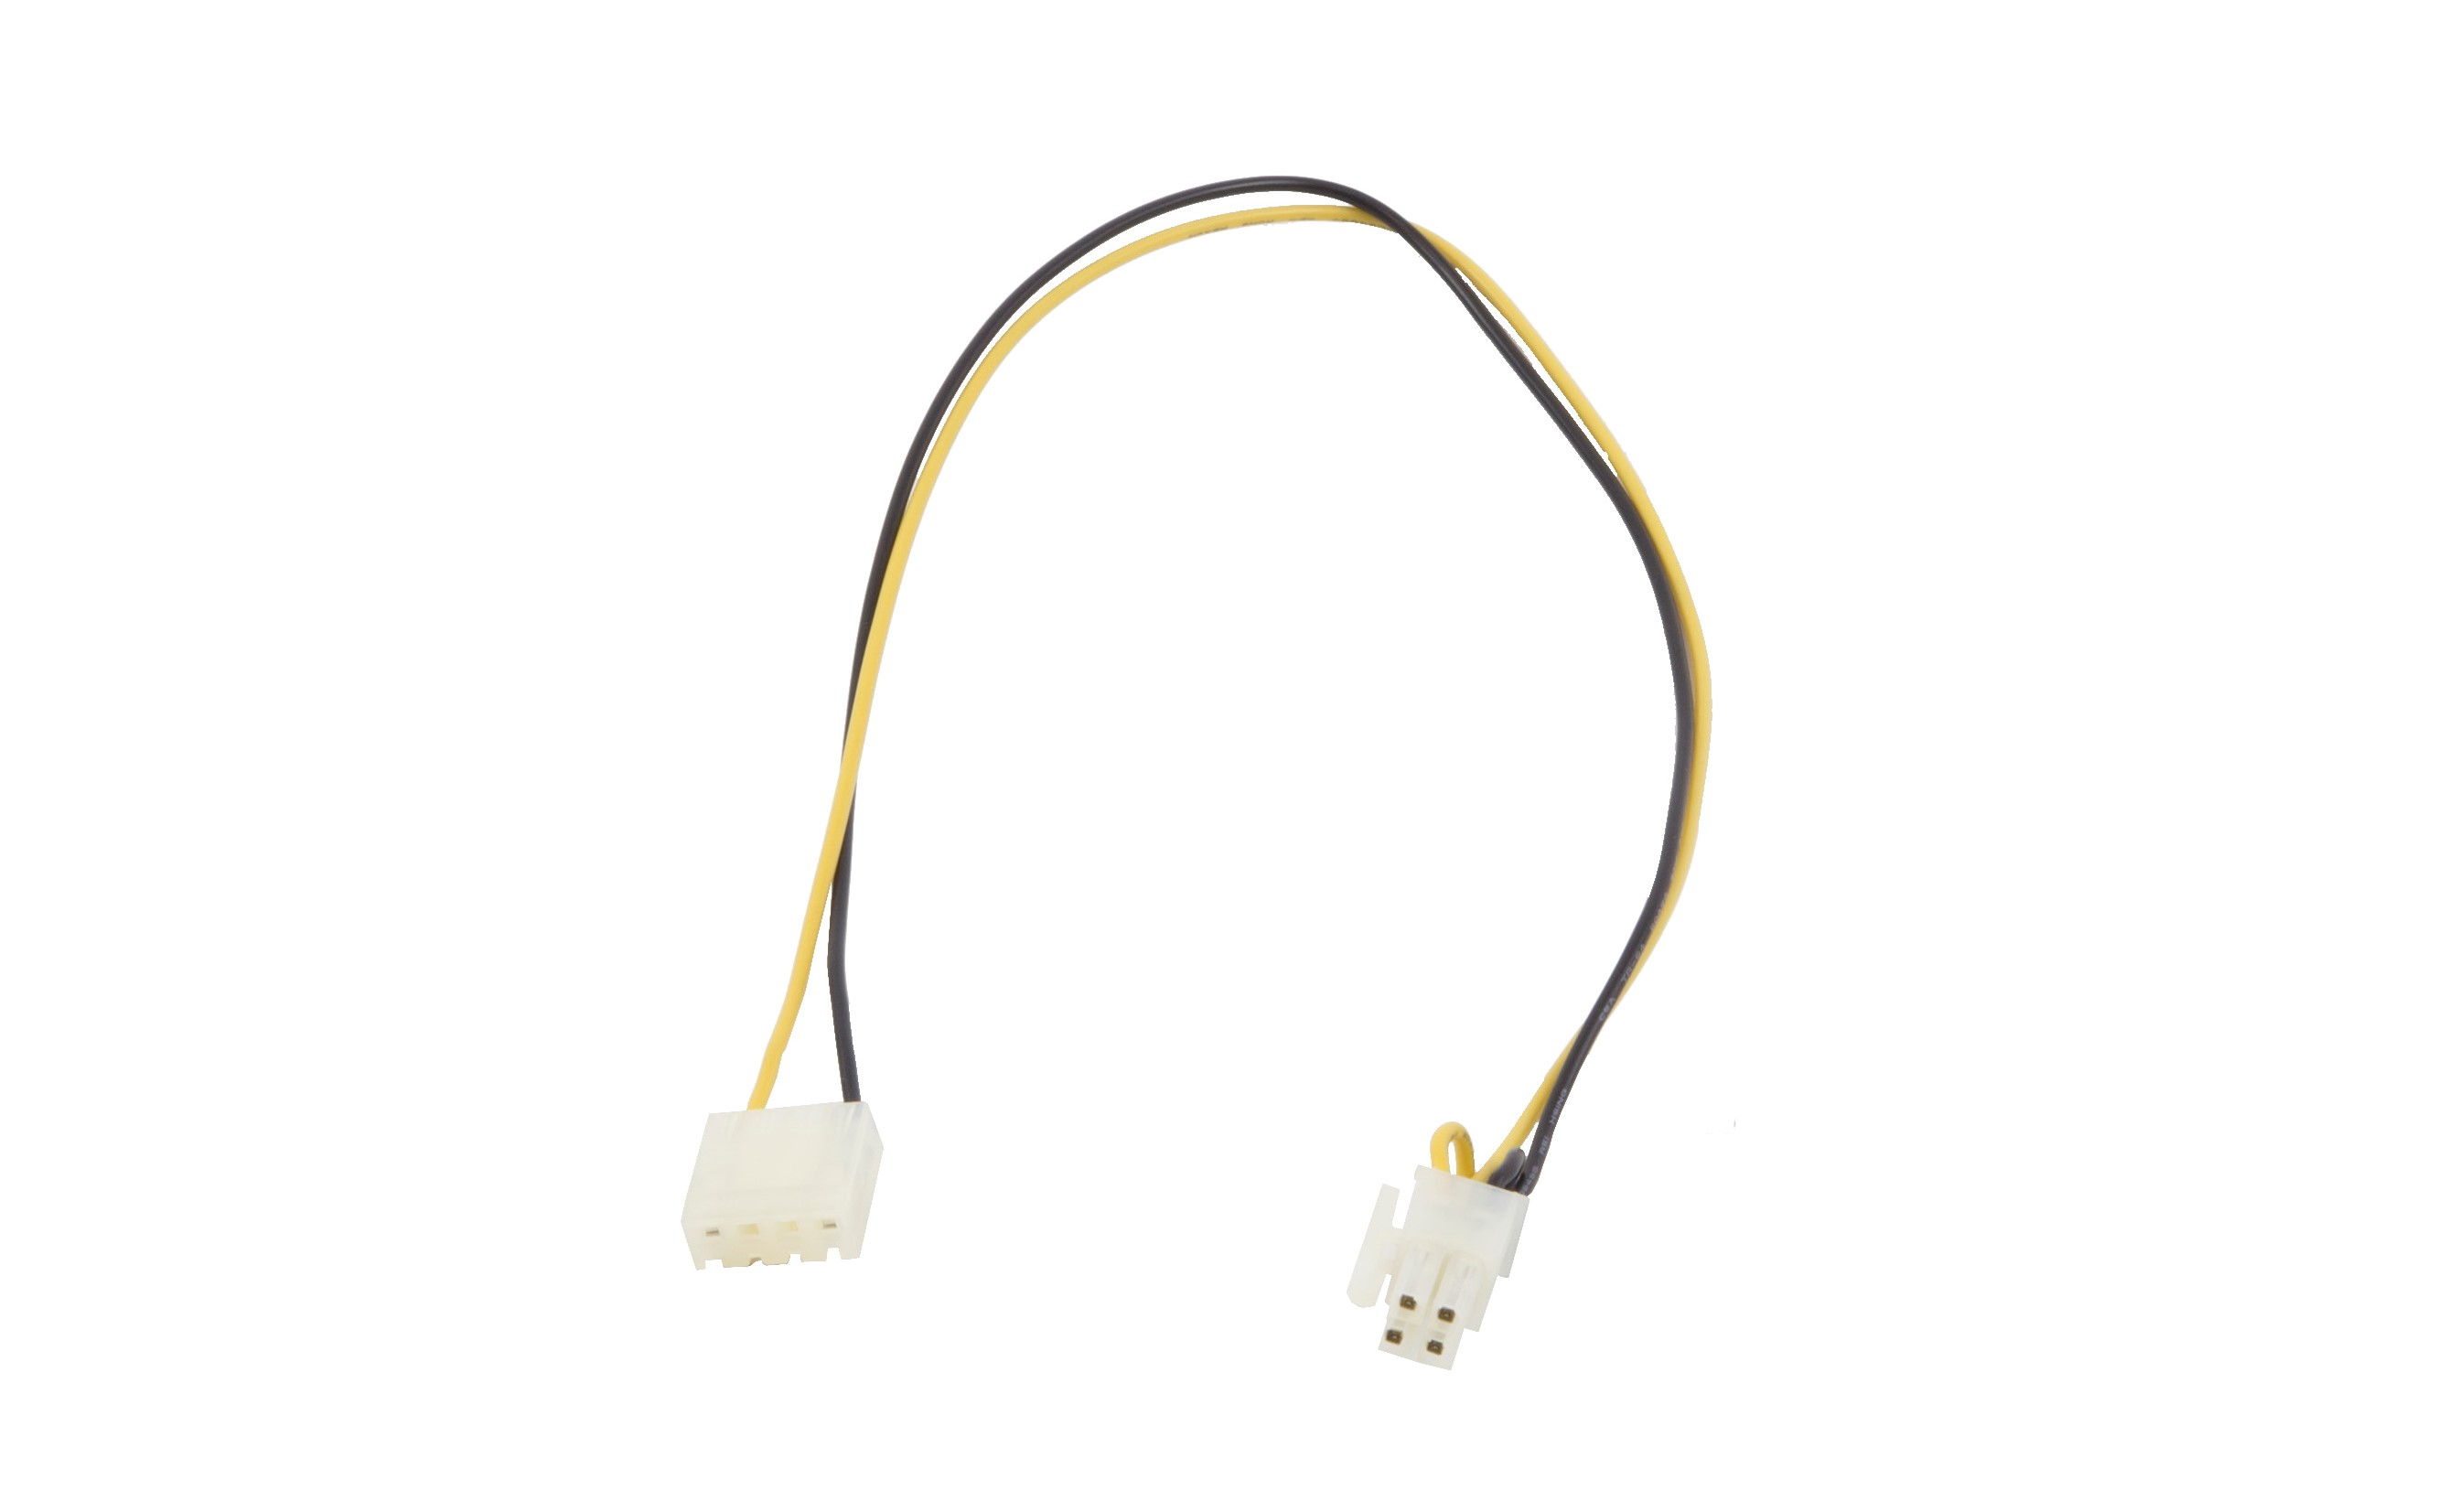 4-4 CABLE  |Products|Accessories|Cable & Cord